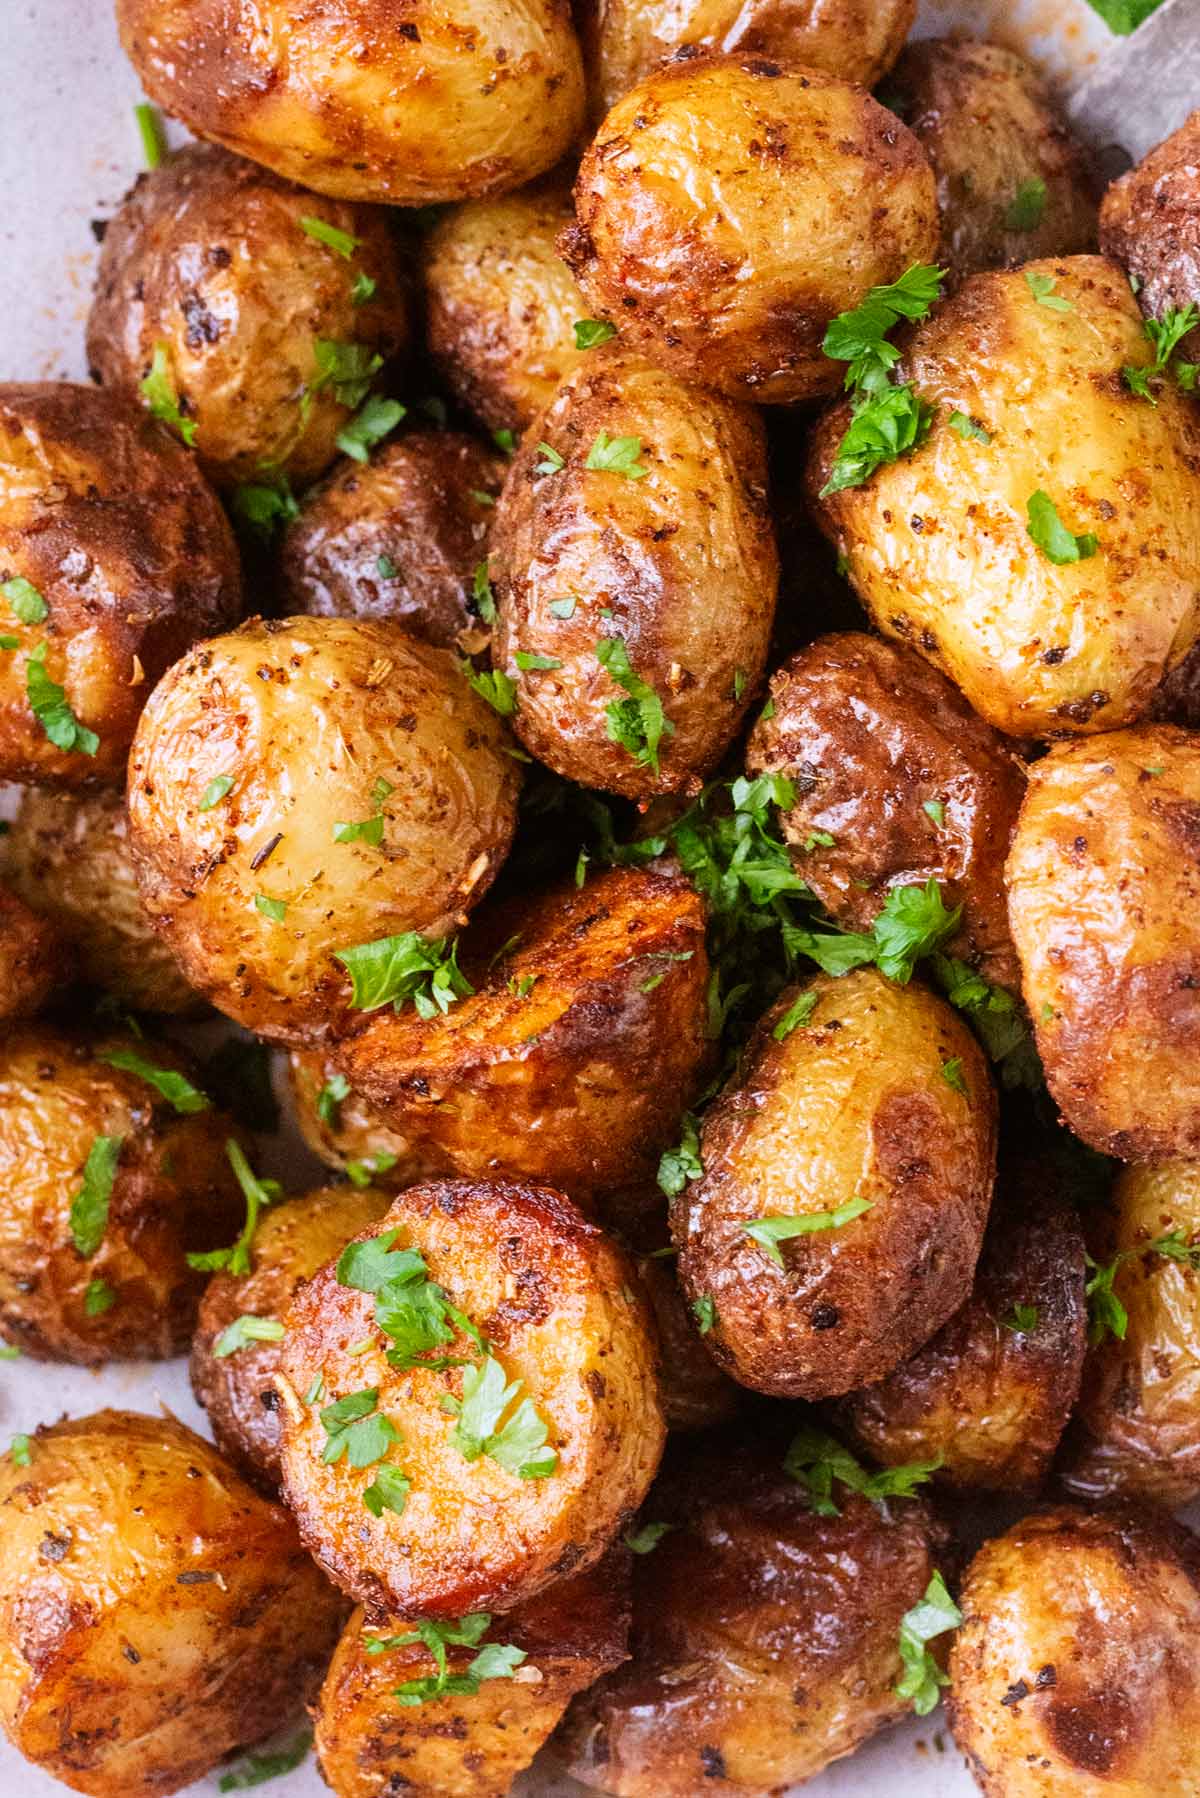 Cooked new potatoes with chopped parsley sprinkled over them.